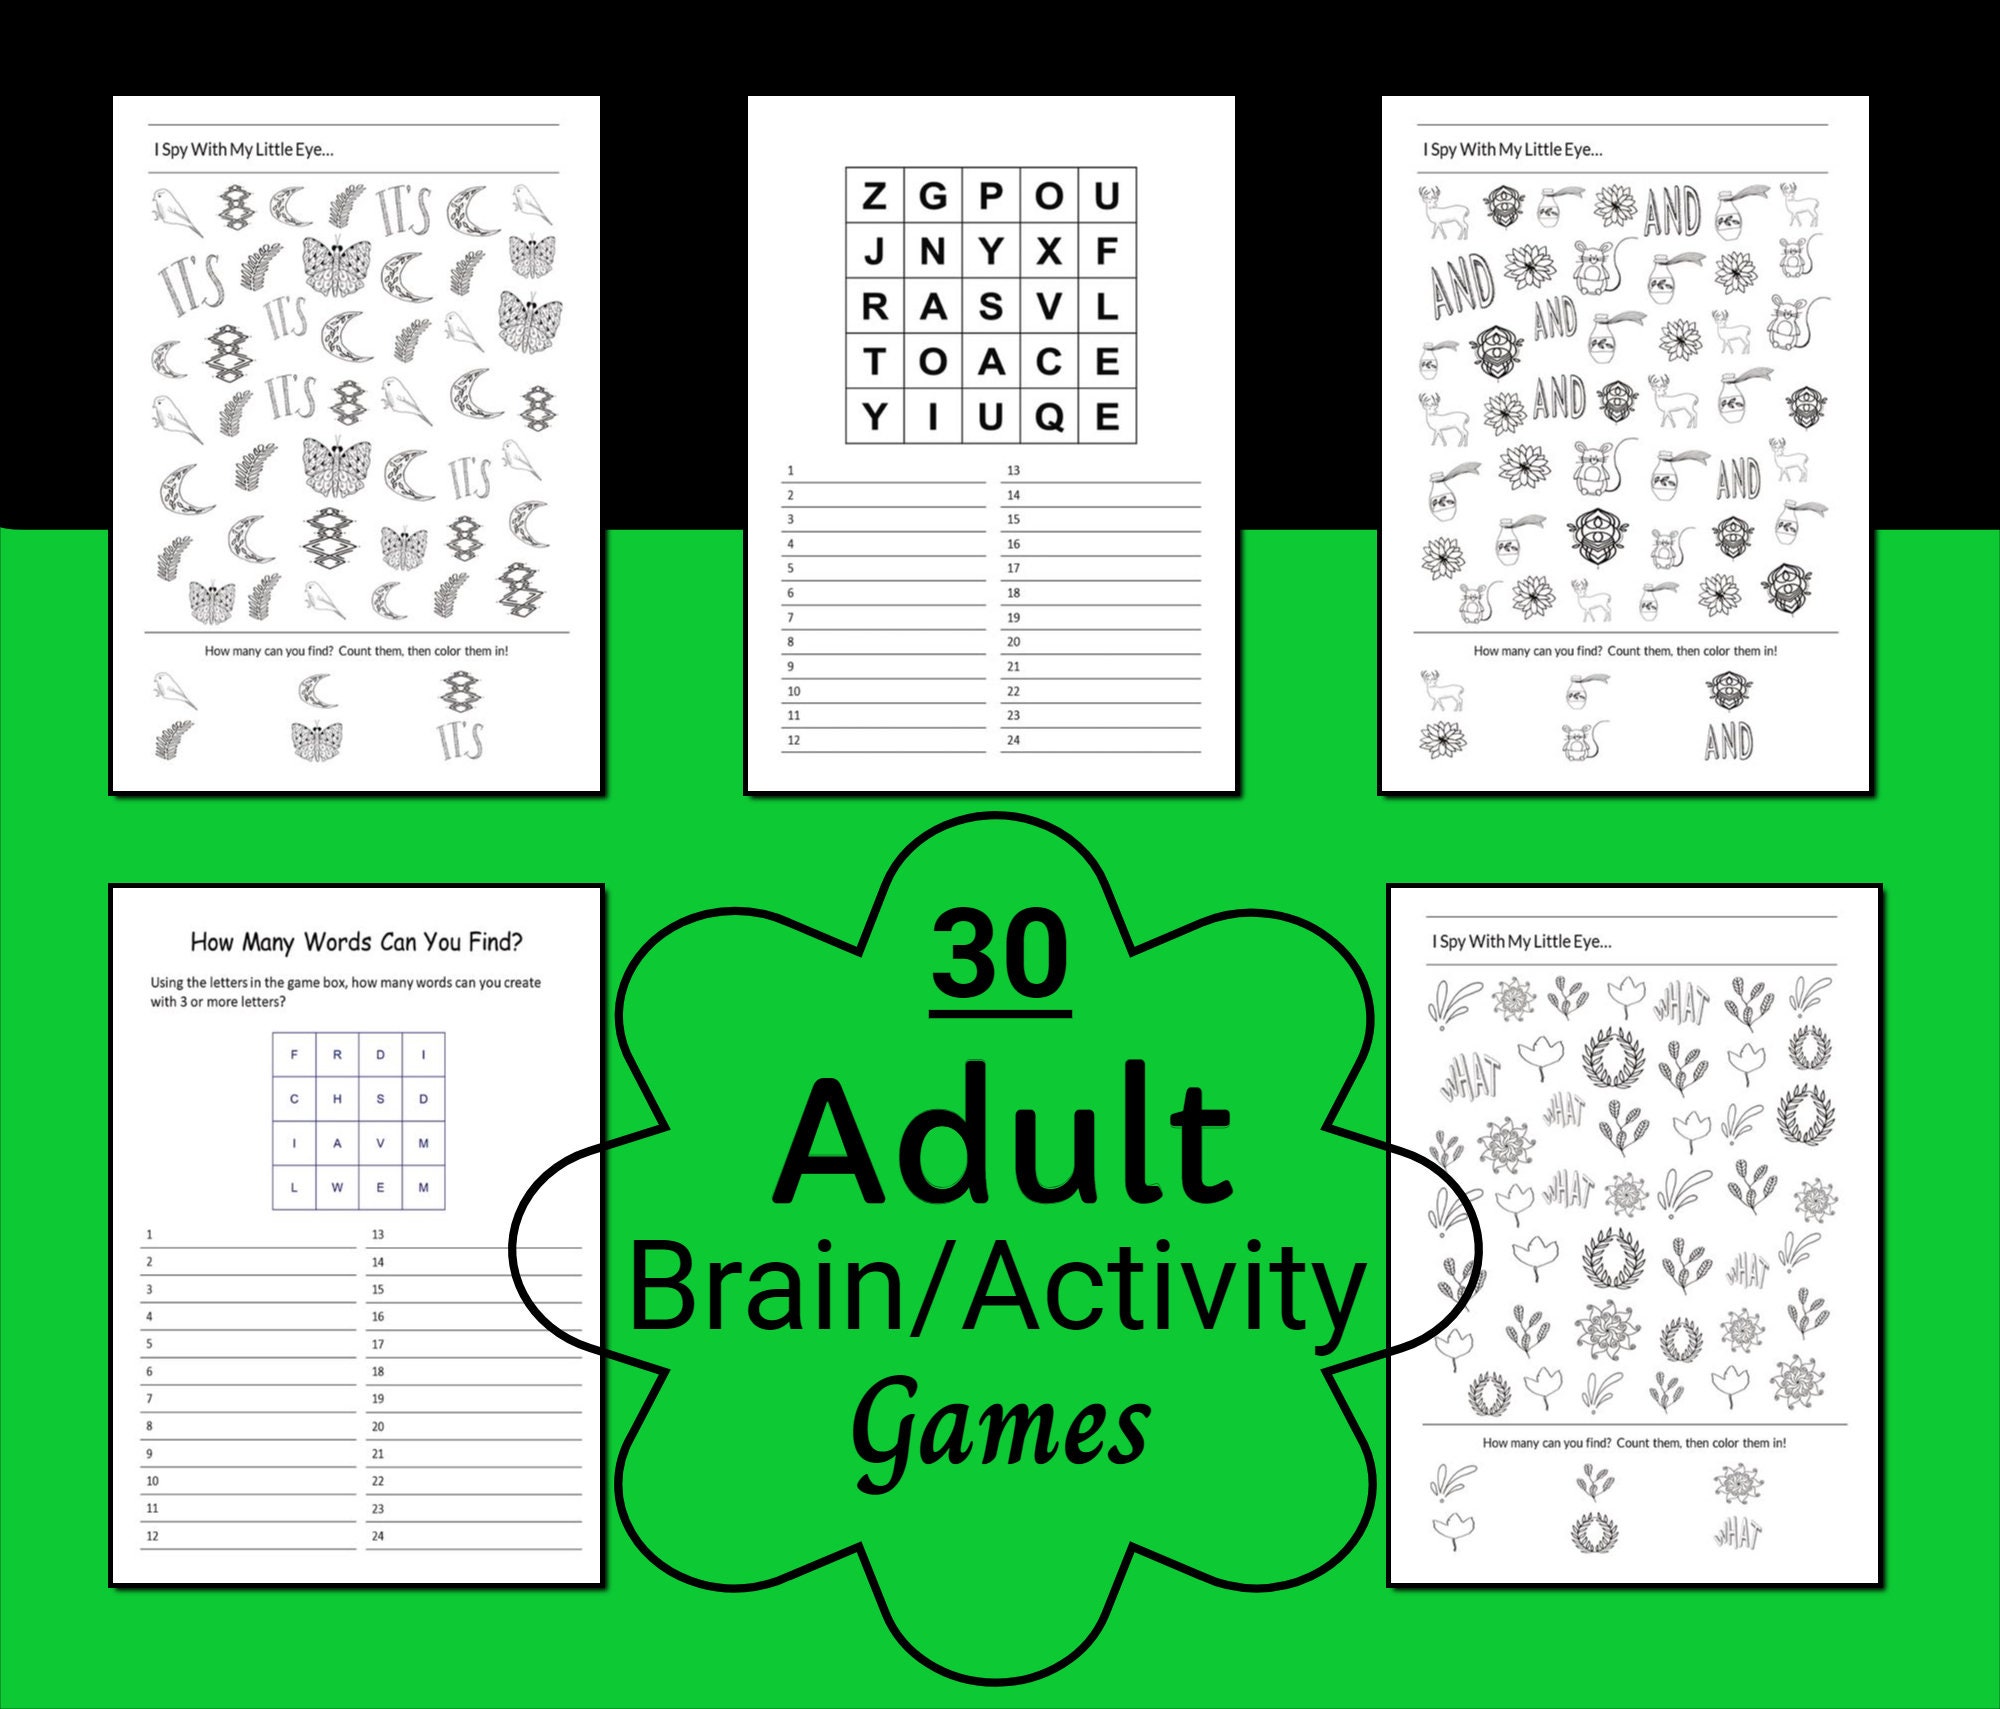 11 Fun Word Games for Seniors to Boost Brainpower